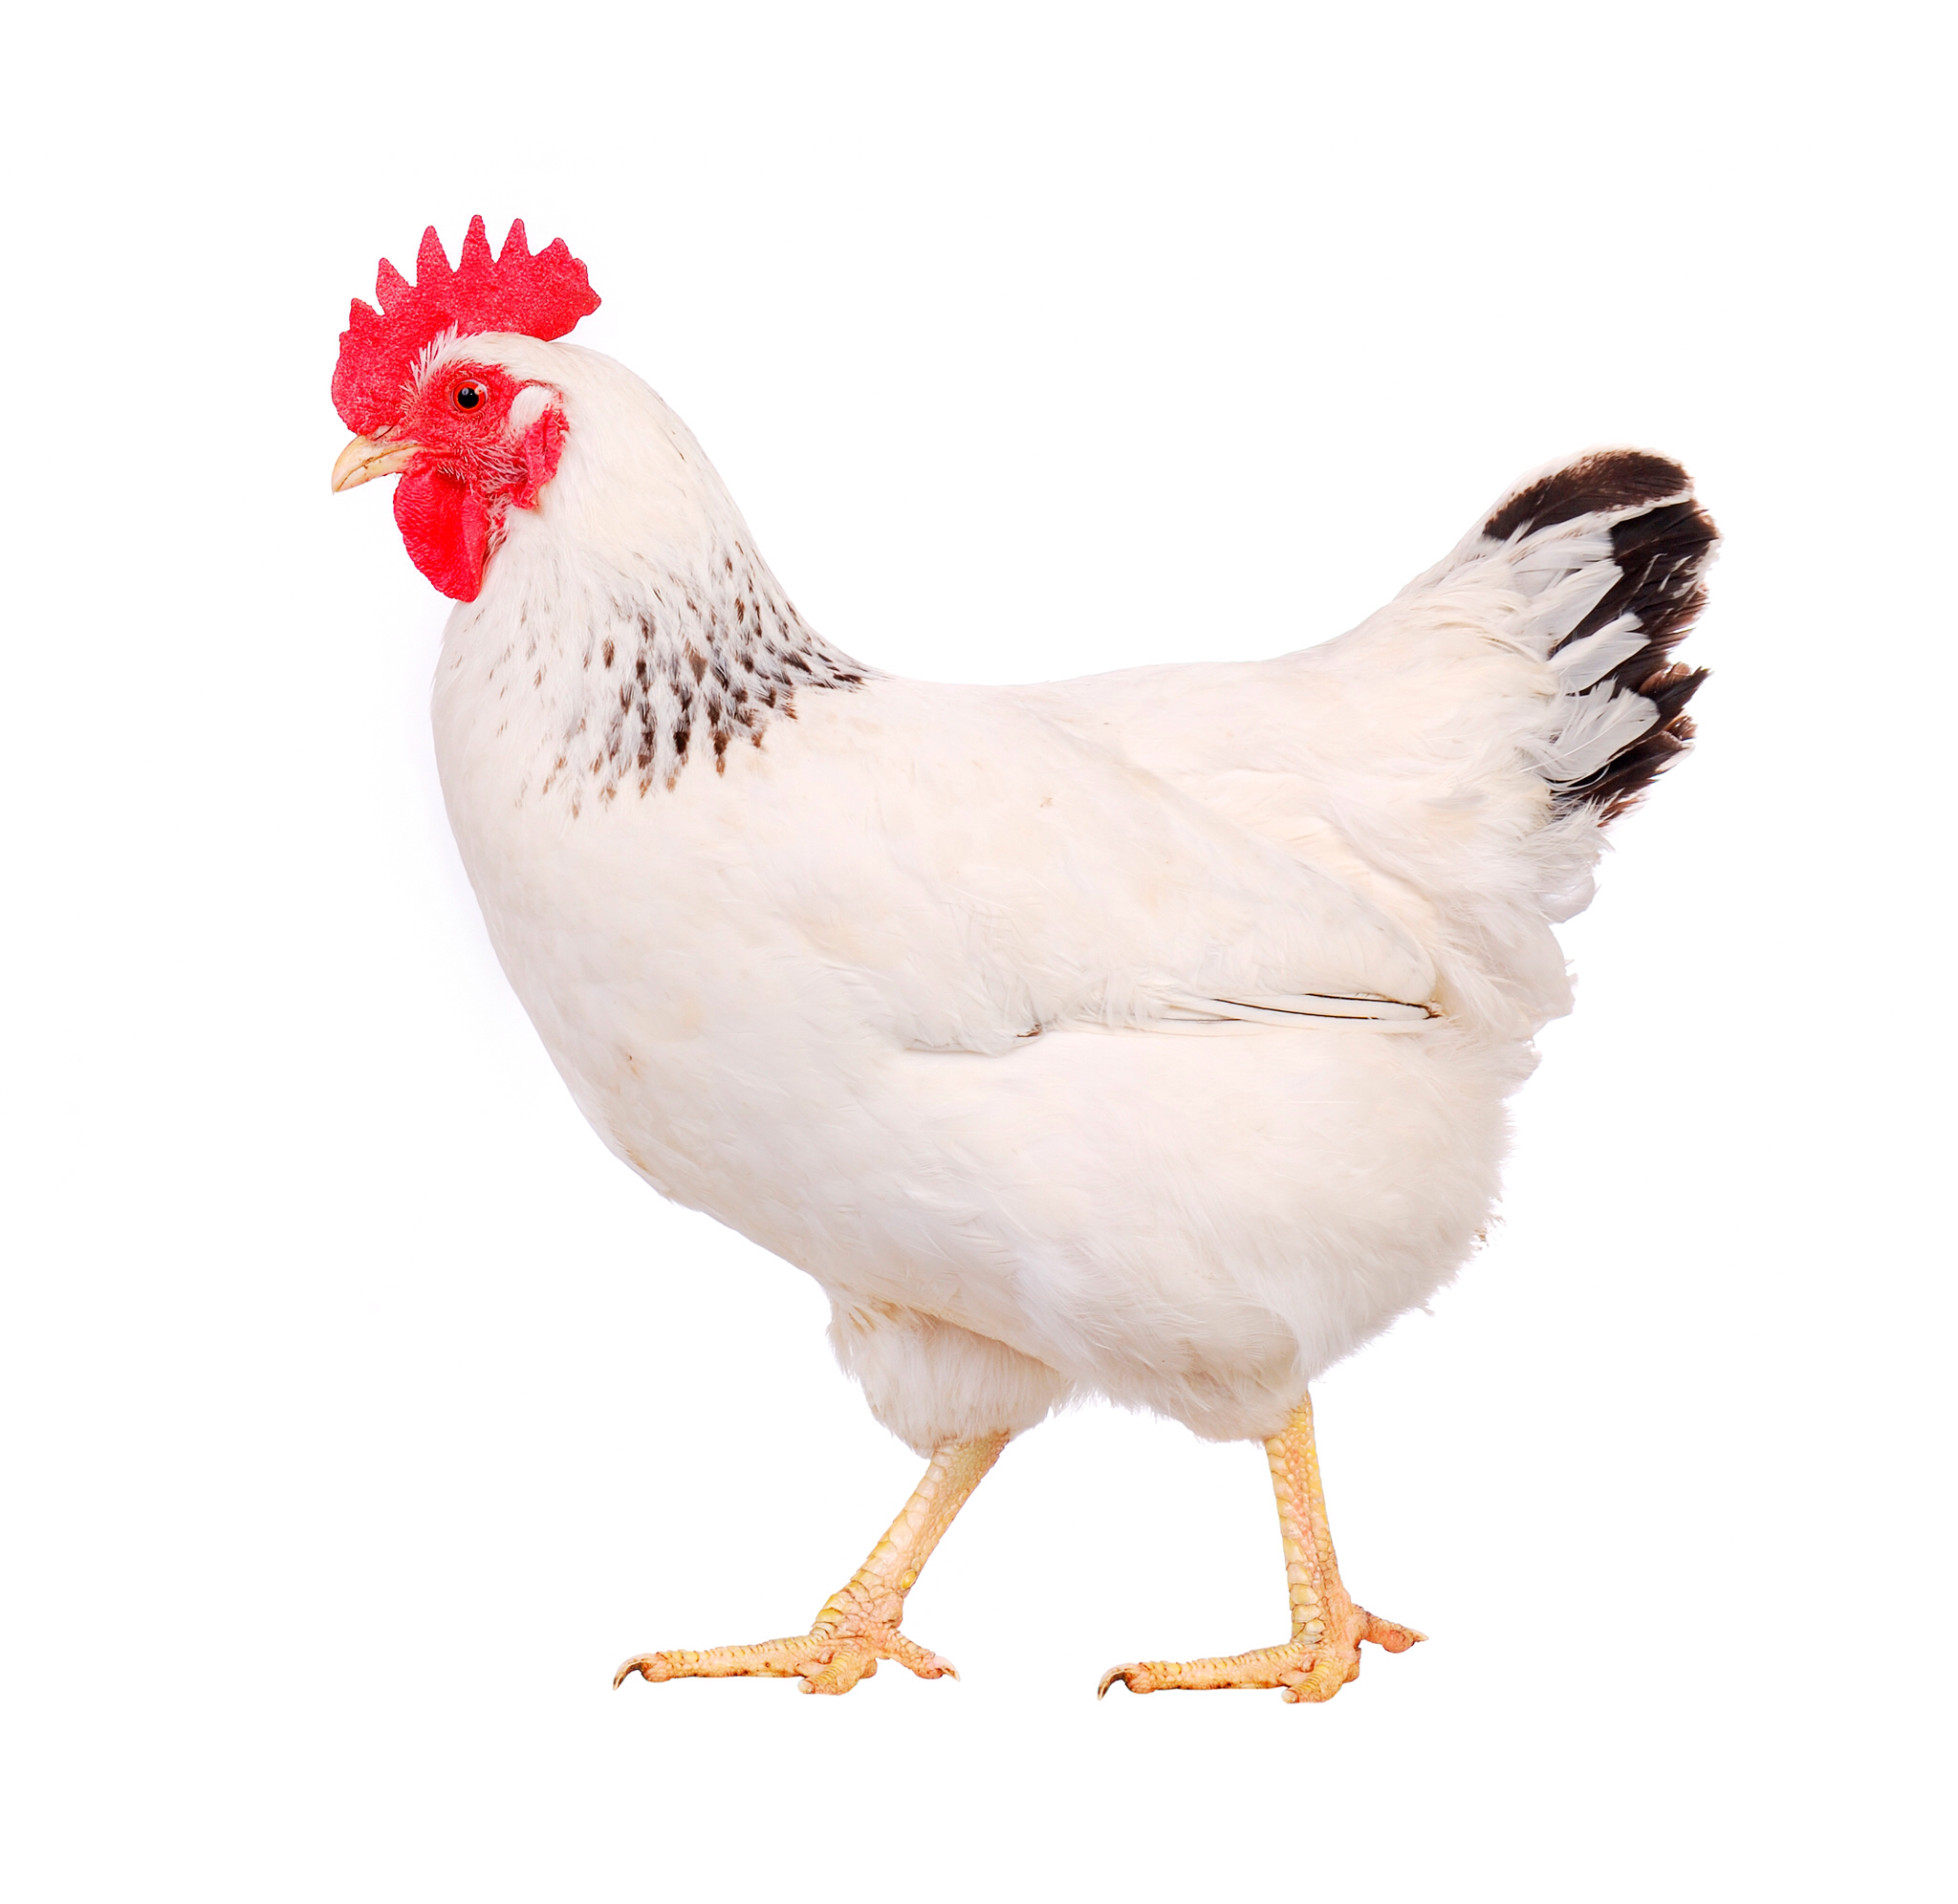 white chicken PNG image